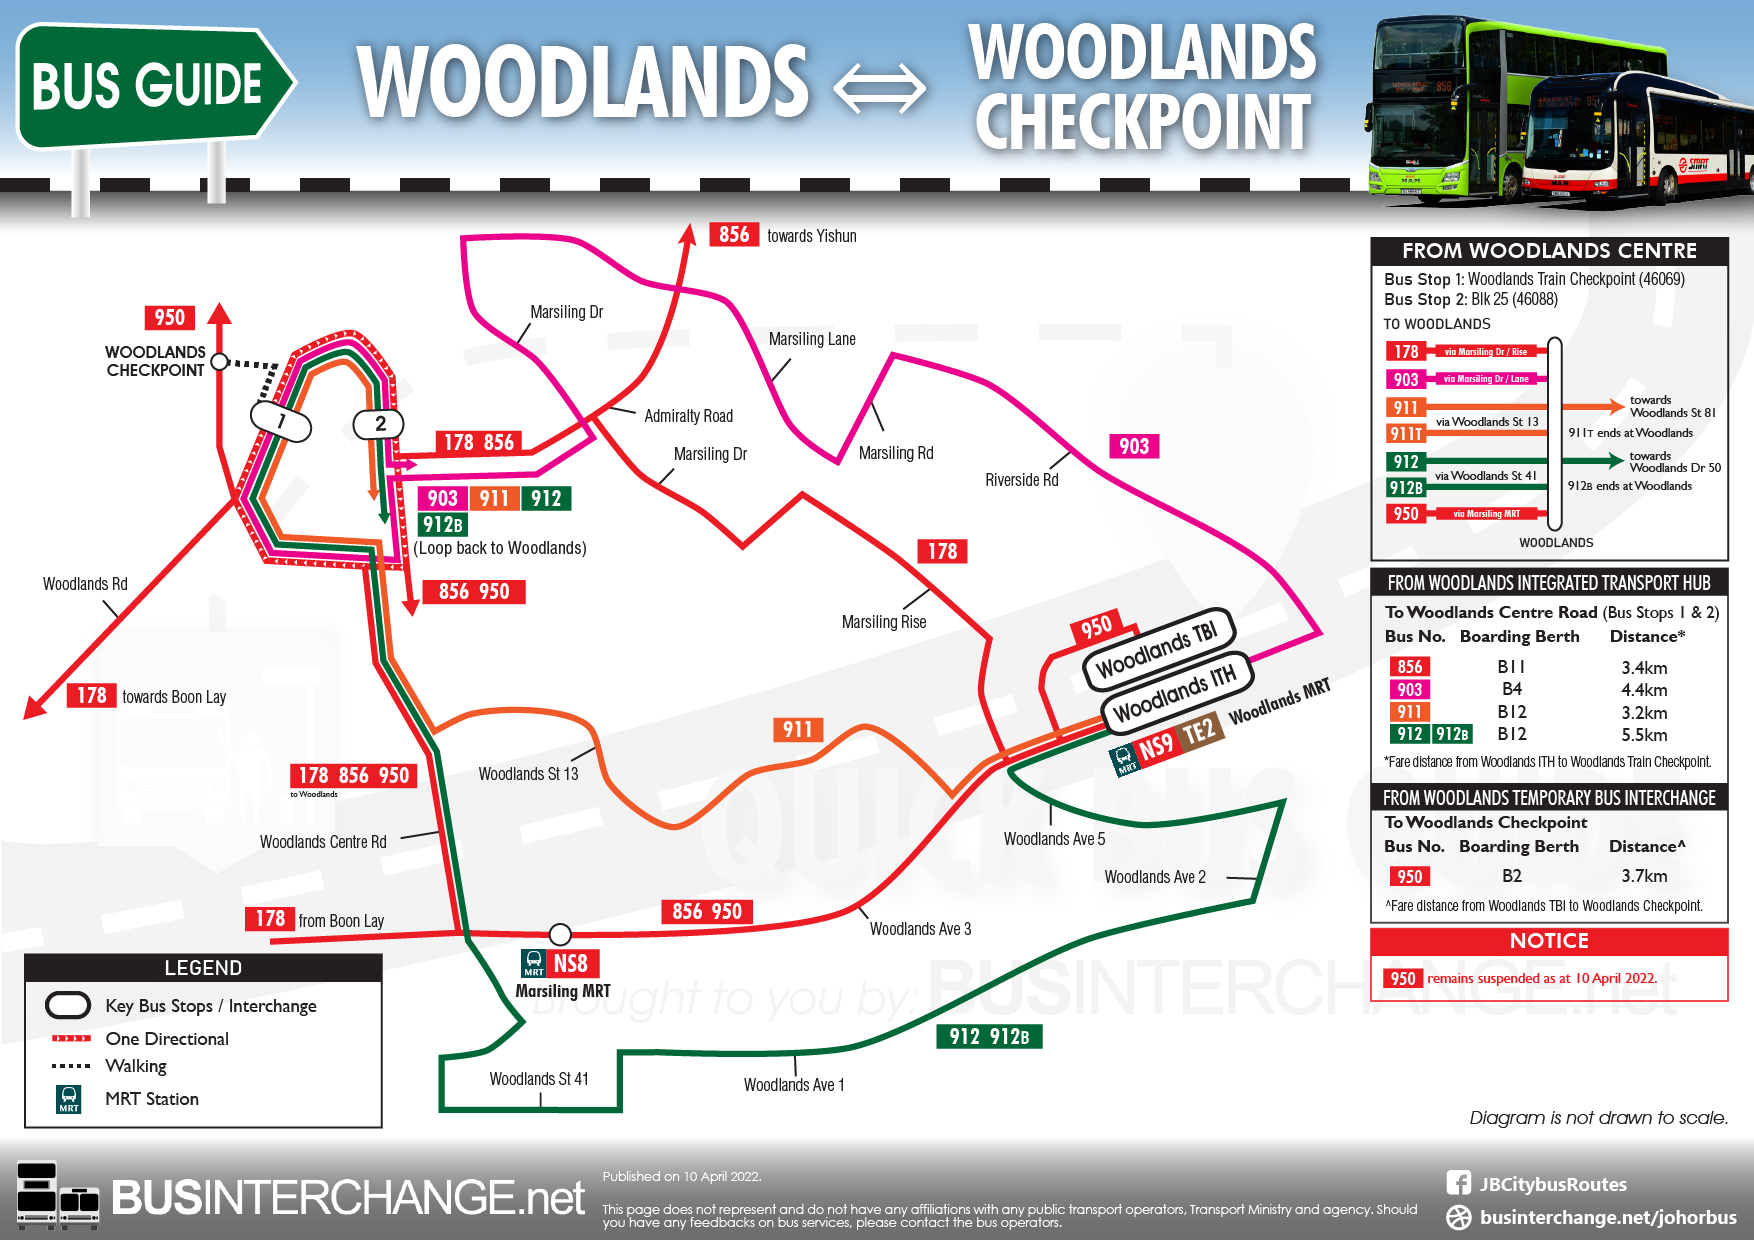 Bus services between Woodlands Interchange and Woodlands Checkpoint.